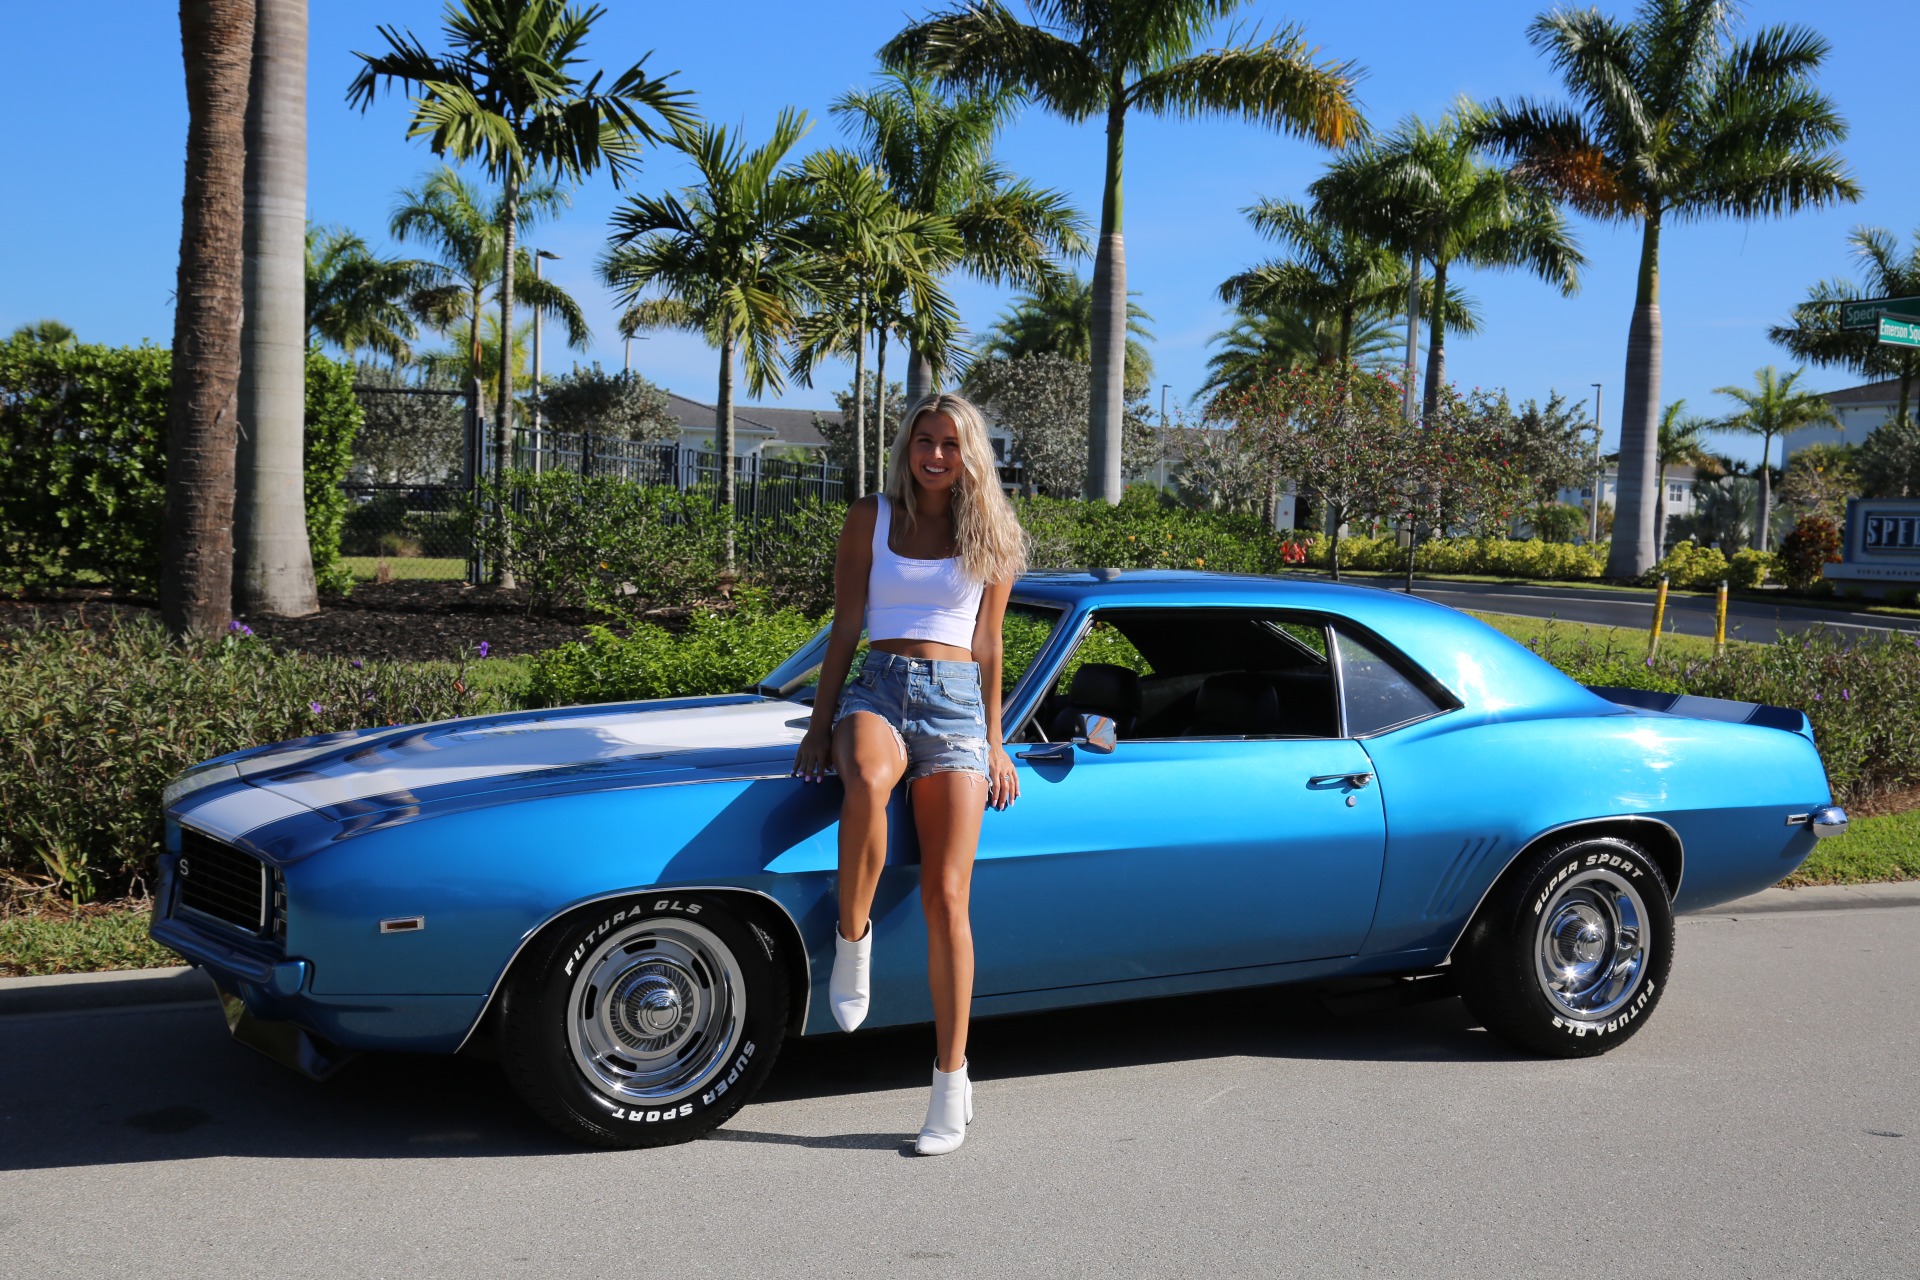 Used 1969 Chevrolet Camaro V8 Auto for sale Sold at Muscle Cars for Sale Inc. in Fort Myers FL 33912 6